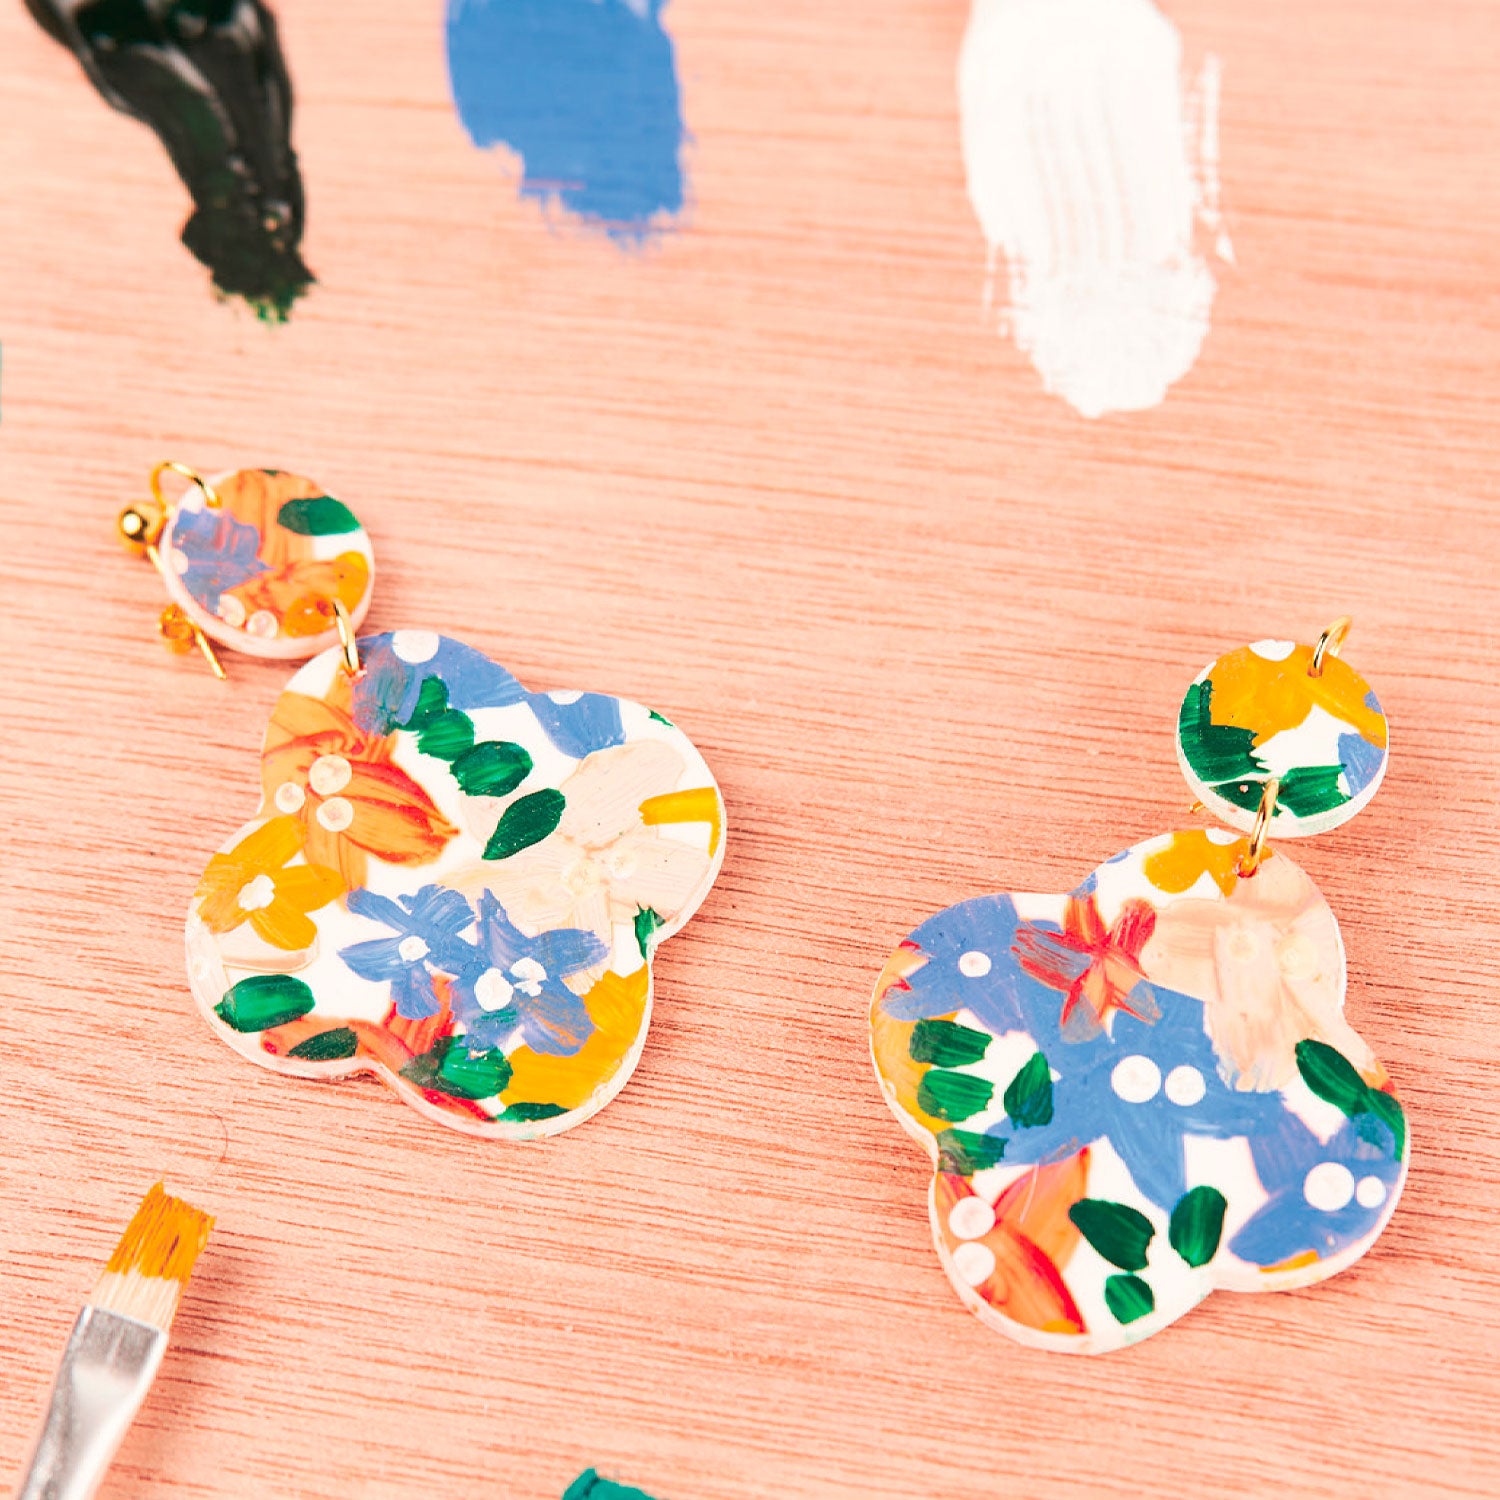 Craftmaker Create Your Own Polymer Clay Jewelry Kit by Hinkler